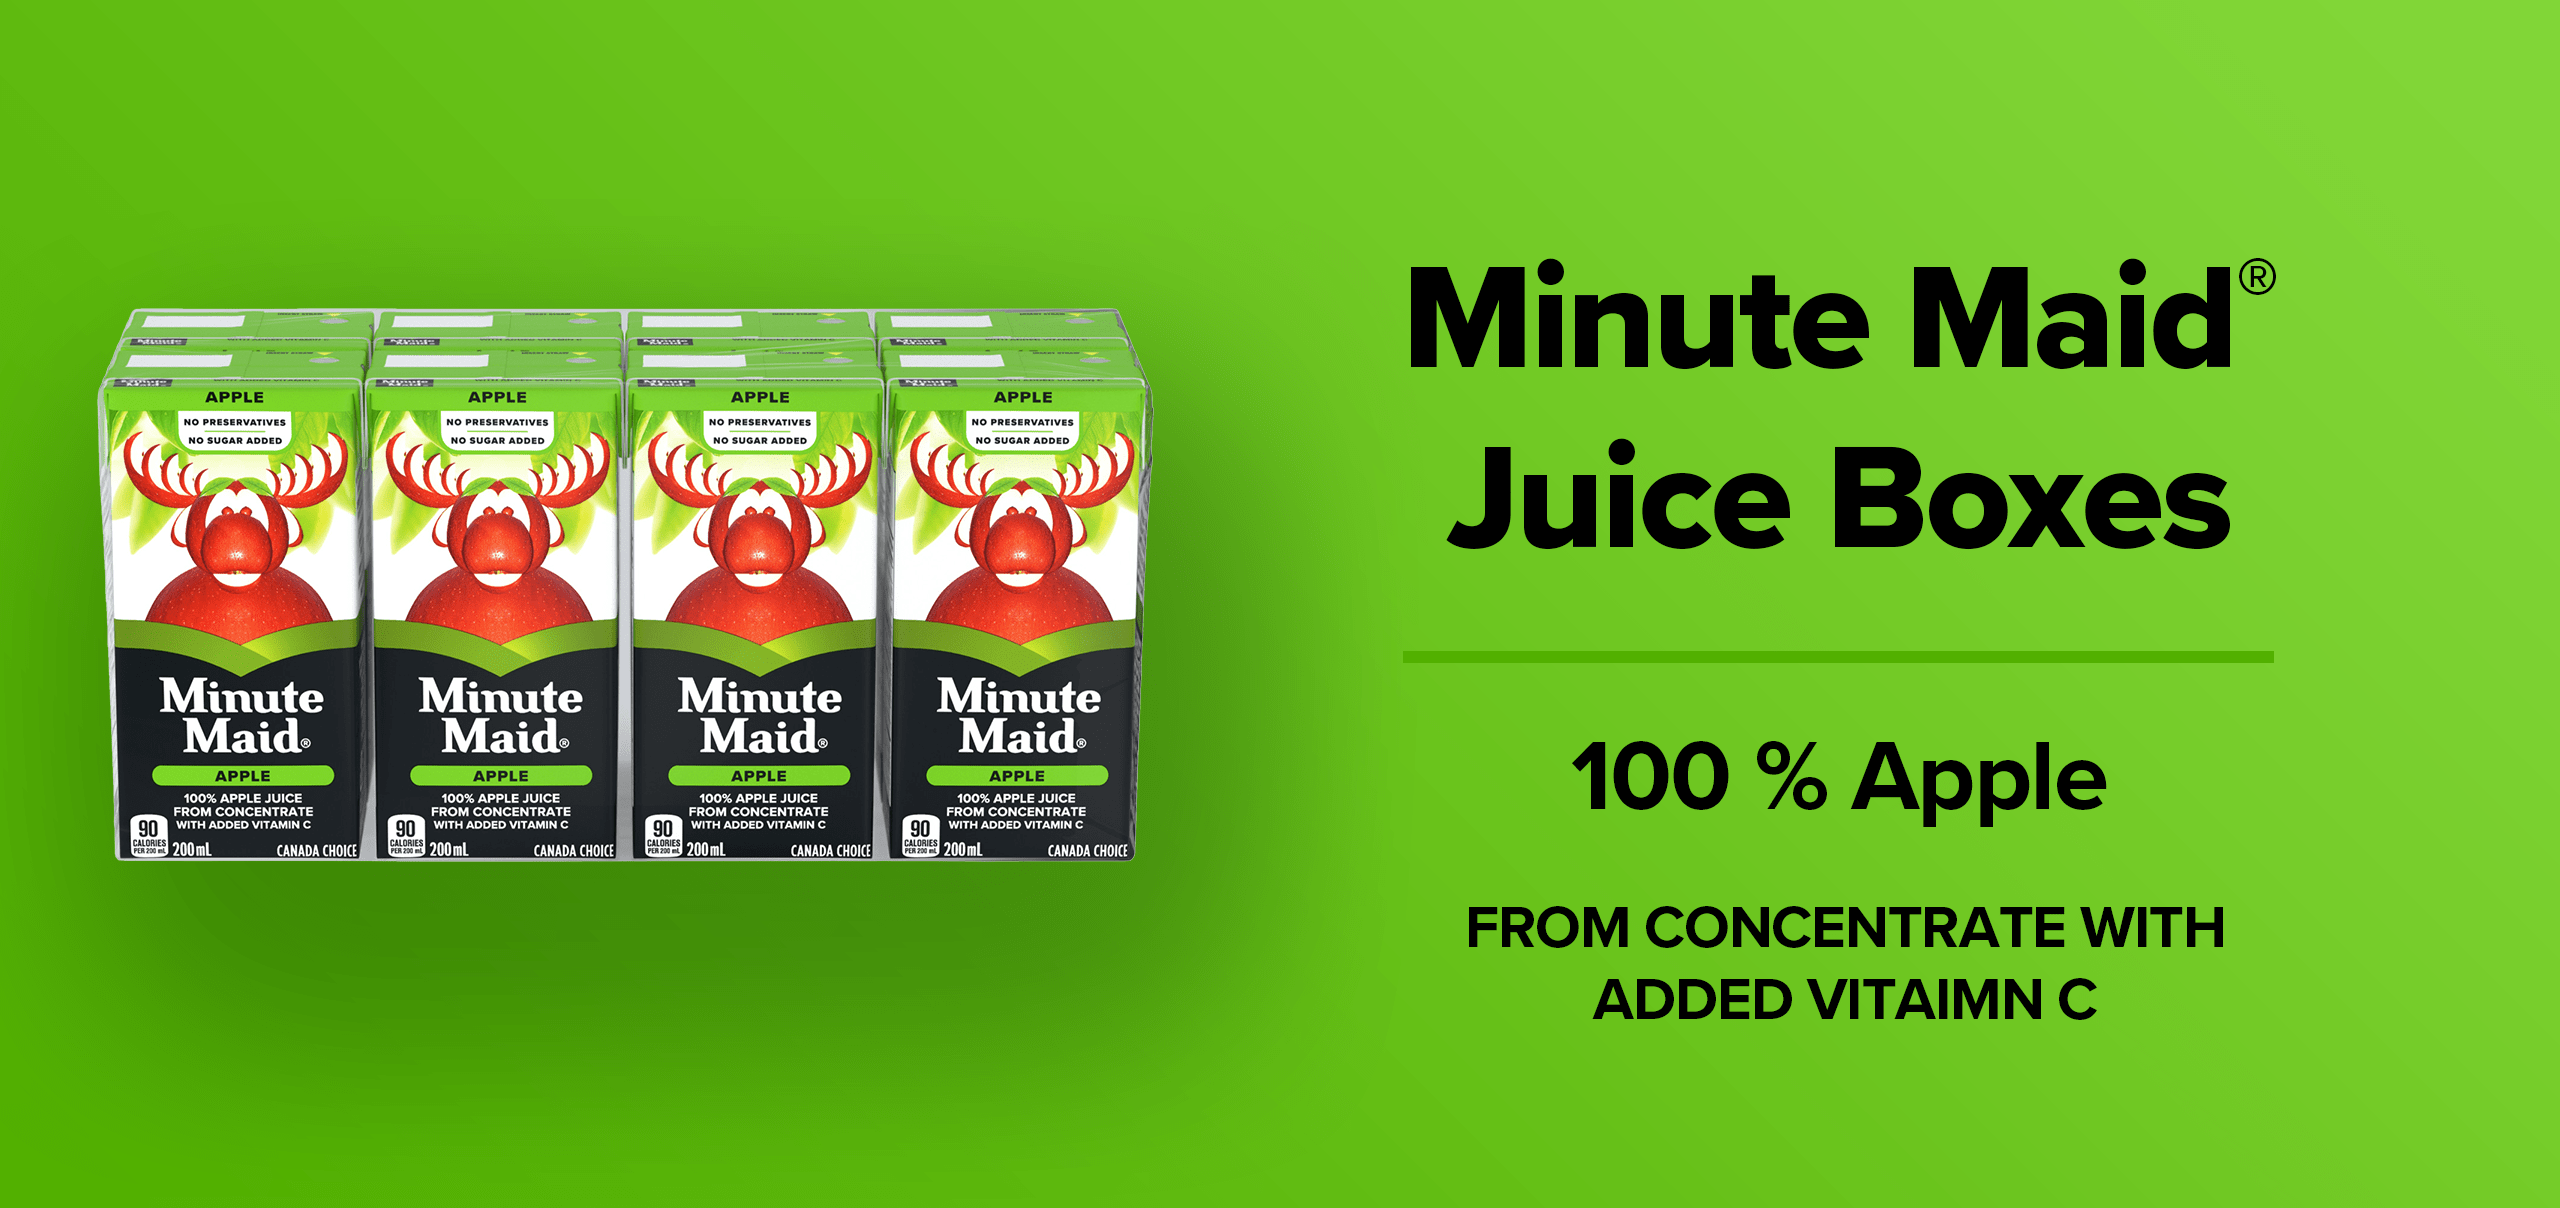 Minute Maid Juice Boxes. 100 % Apple. Made from concentrate with added vitamin C